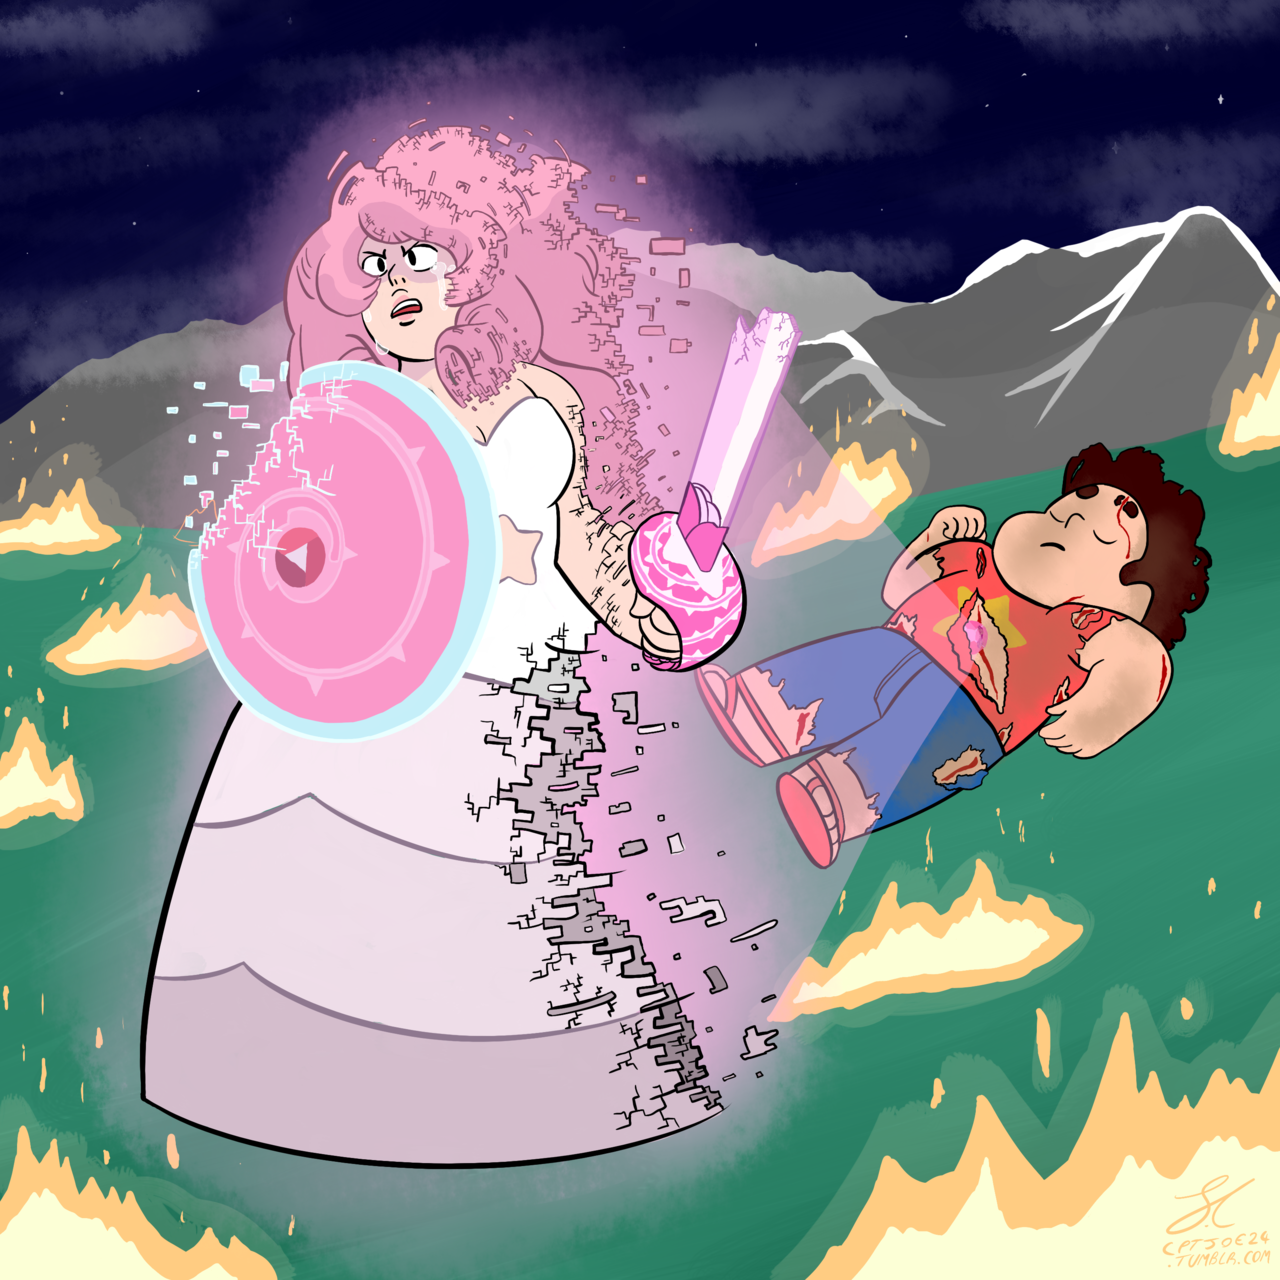 “Stay away from my Son!” How I imagine Rose Quartz could reform without Steven ‘poofing.’